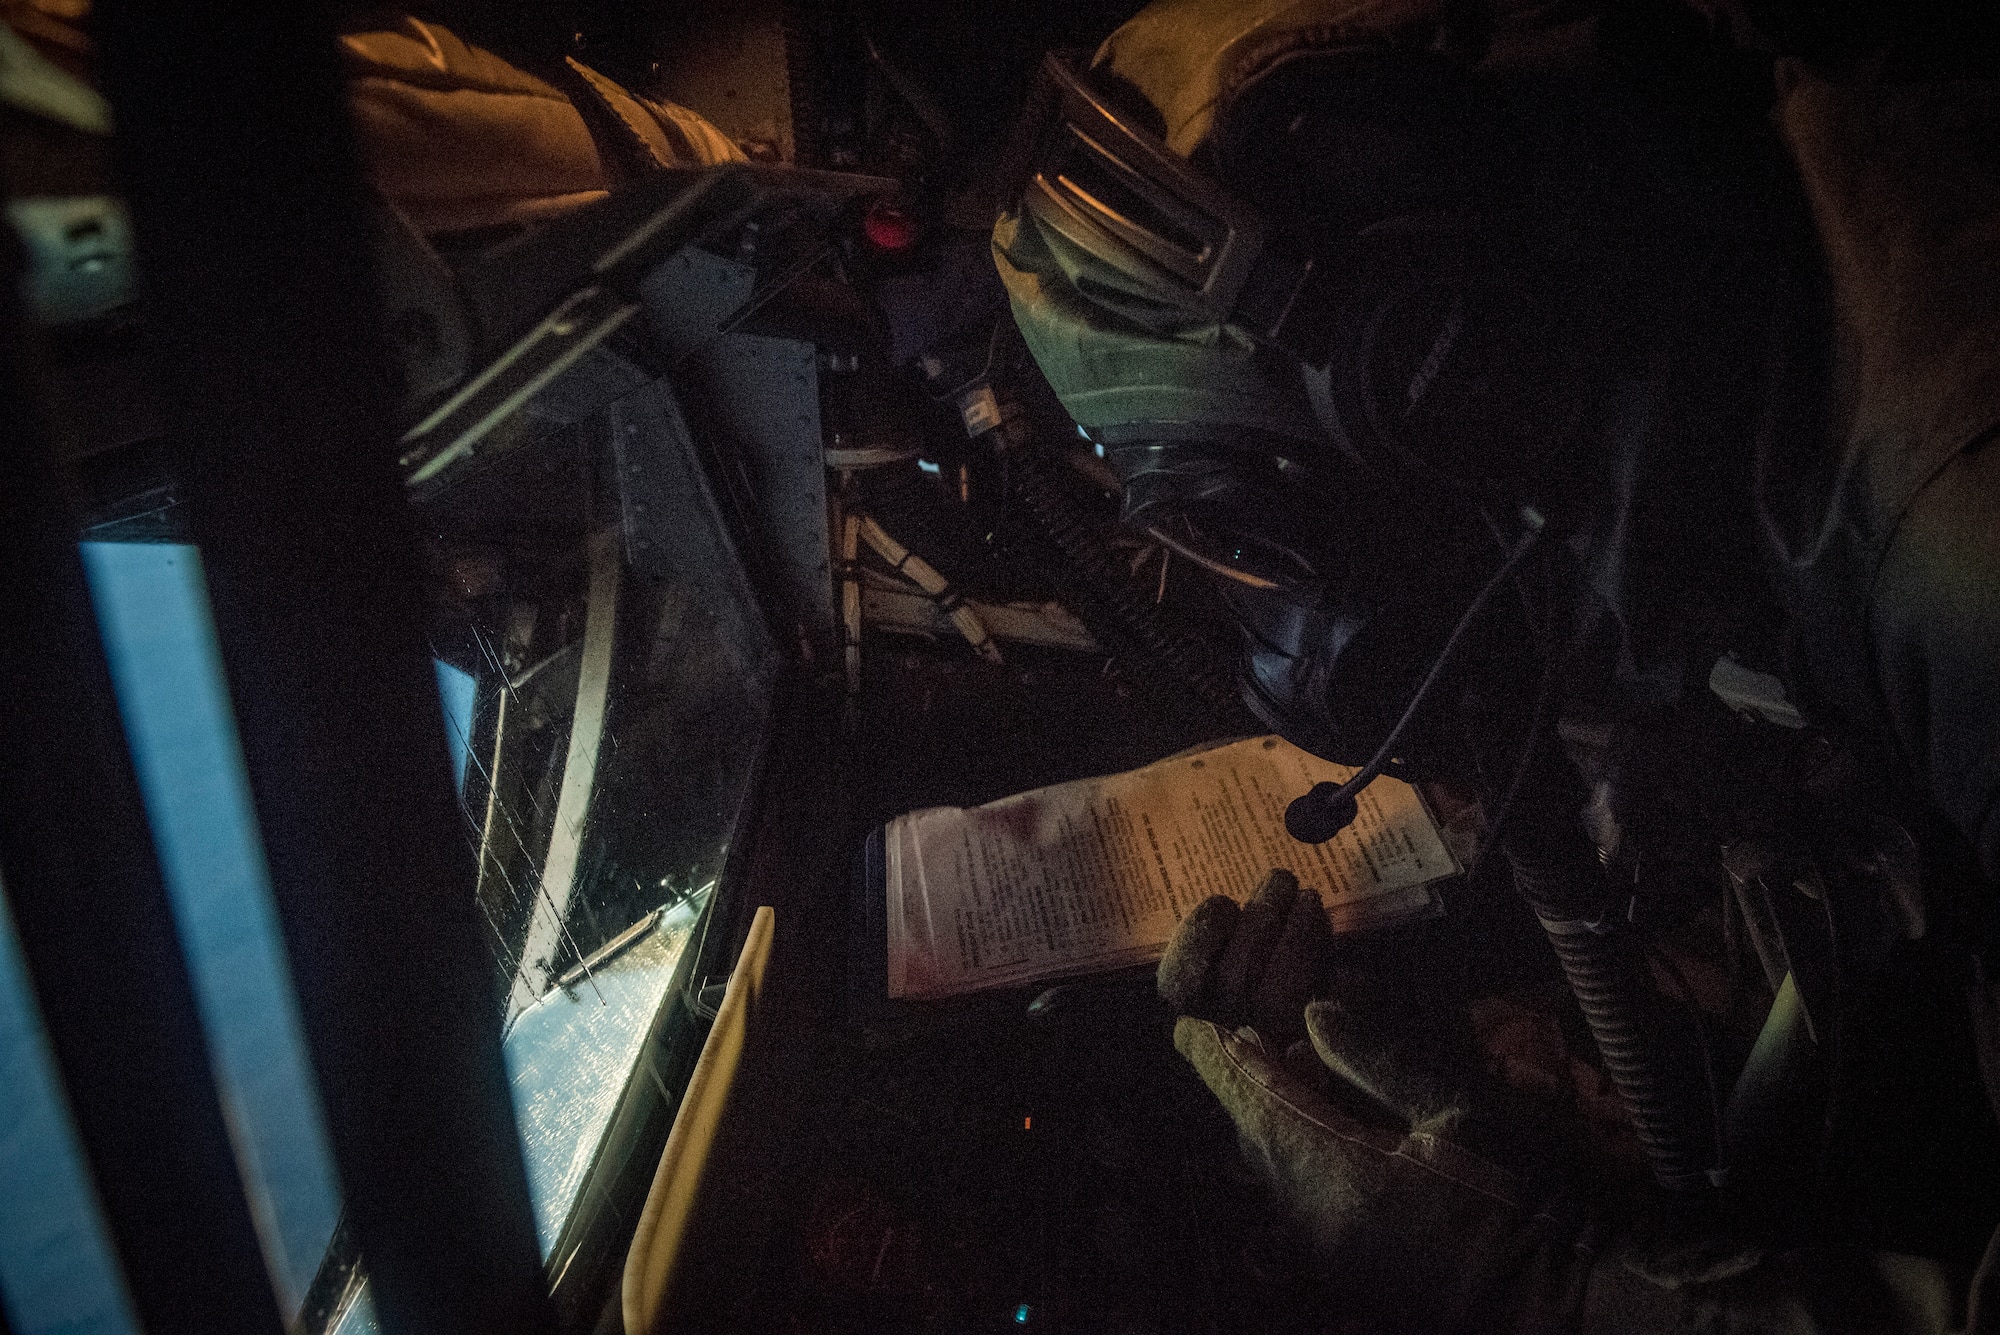 Airman 1st Class Jeremiah Guinto, 92nd Air Refueling Squadron boom operator, reviews a task checklist during the first in-field use and test of the new Joint Service Aircrew Mask on a KC-135 at Fairchild Air Force Base, Washington, July 17, 2018. The development of the JSAM contributes to the continuous investments in Mobility Air Force capabilities and readiness, which is essential to ensuring the Air Force maintains range, speed and agility advantages over potential adversaries, and in support of global mobility operations. (U.S. Air Force photo/ Airman 1st Class Whitney Laine)